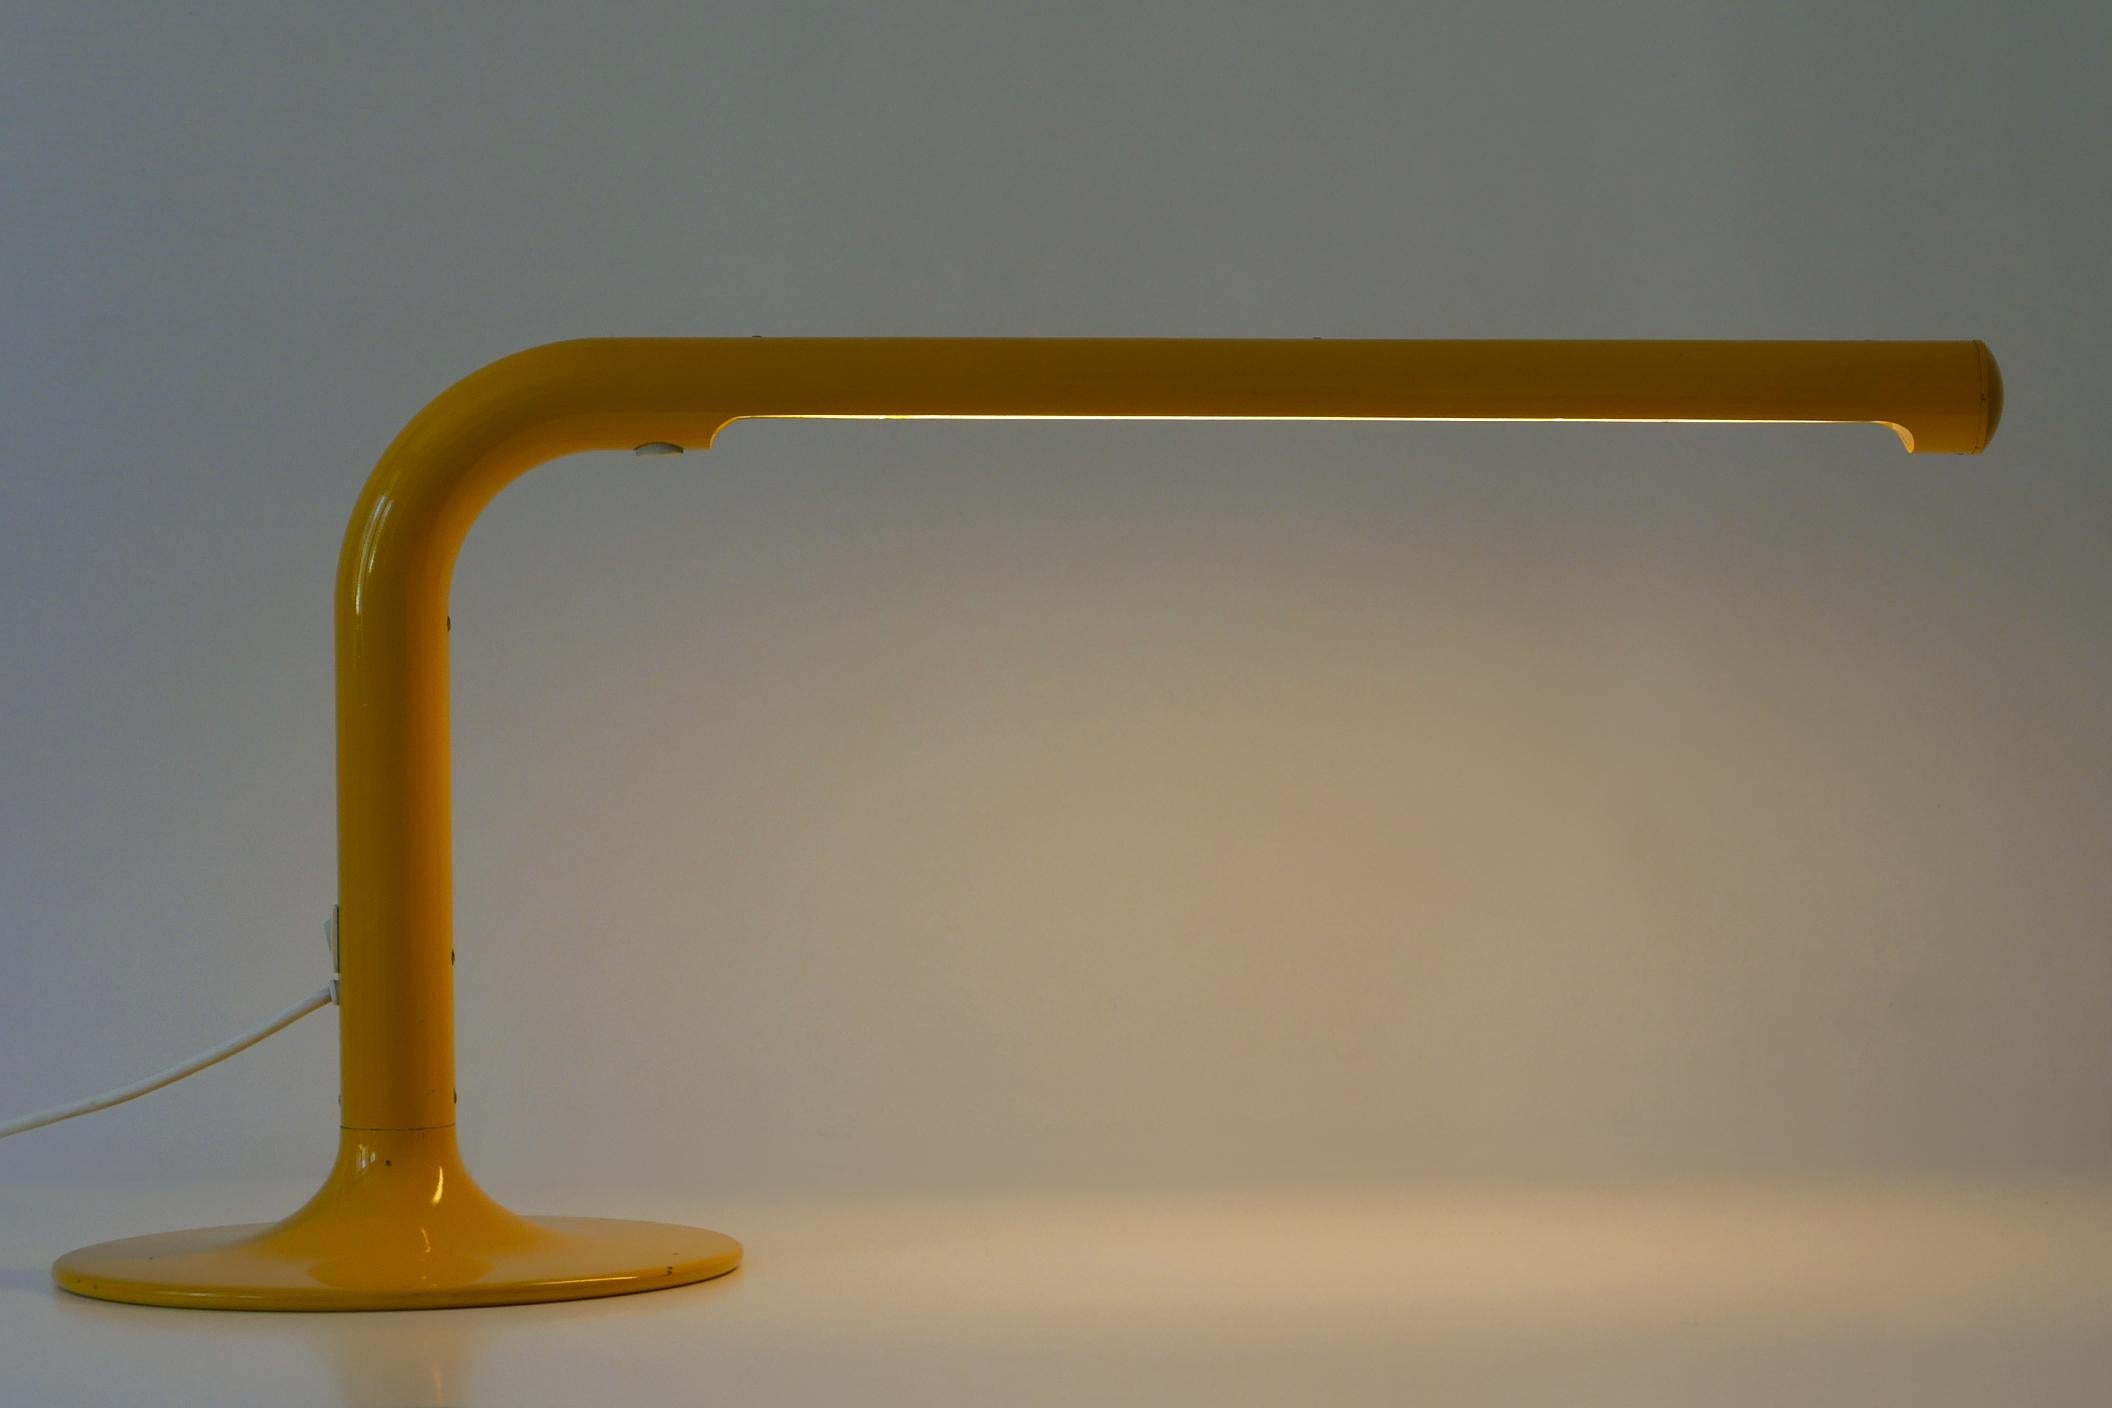 Large & Elegant Tube Table Lamp by Anders Pehrson for Ateljé Lyktan, 1960s For Sale 2